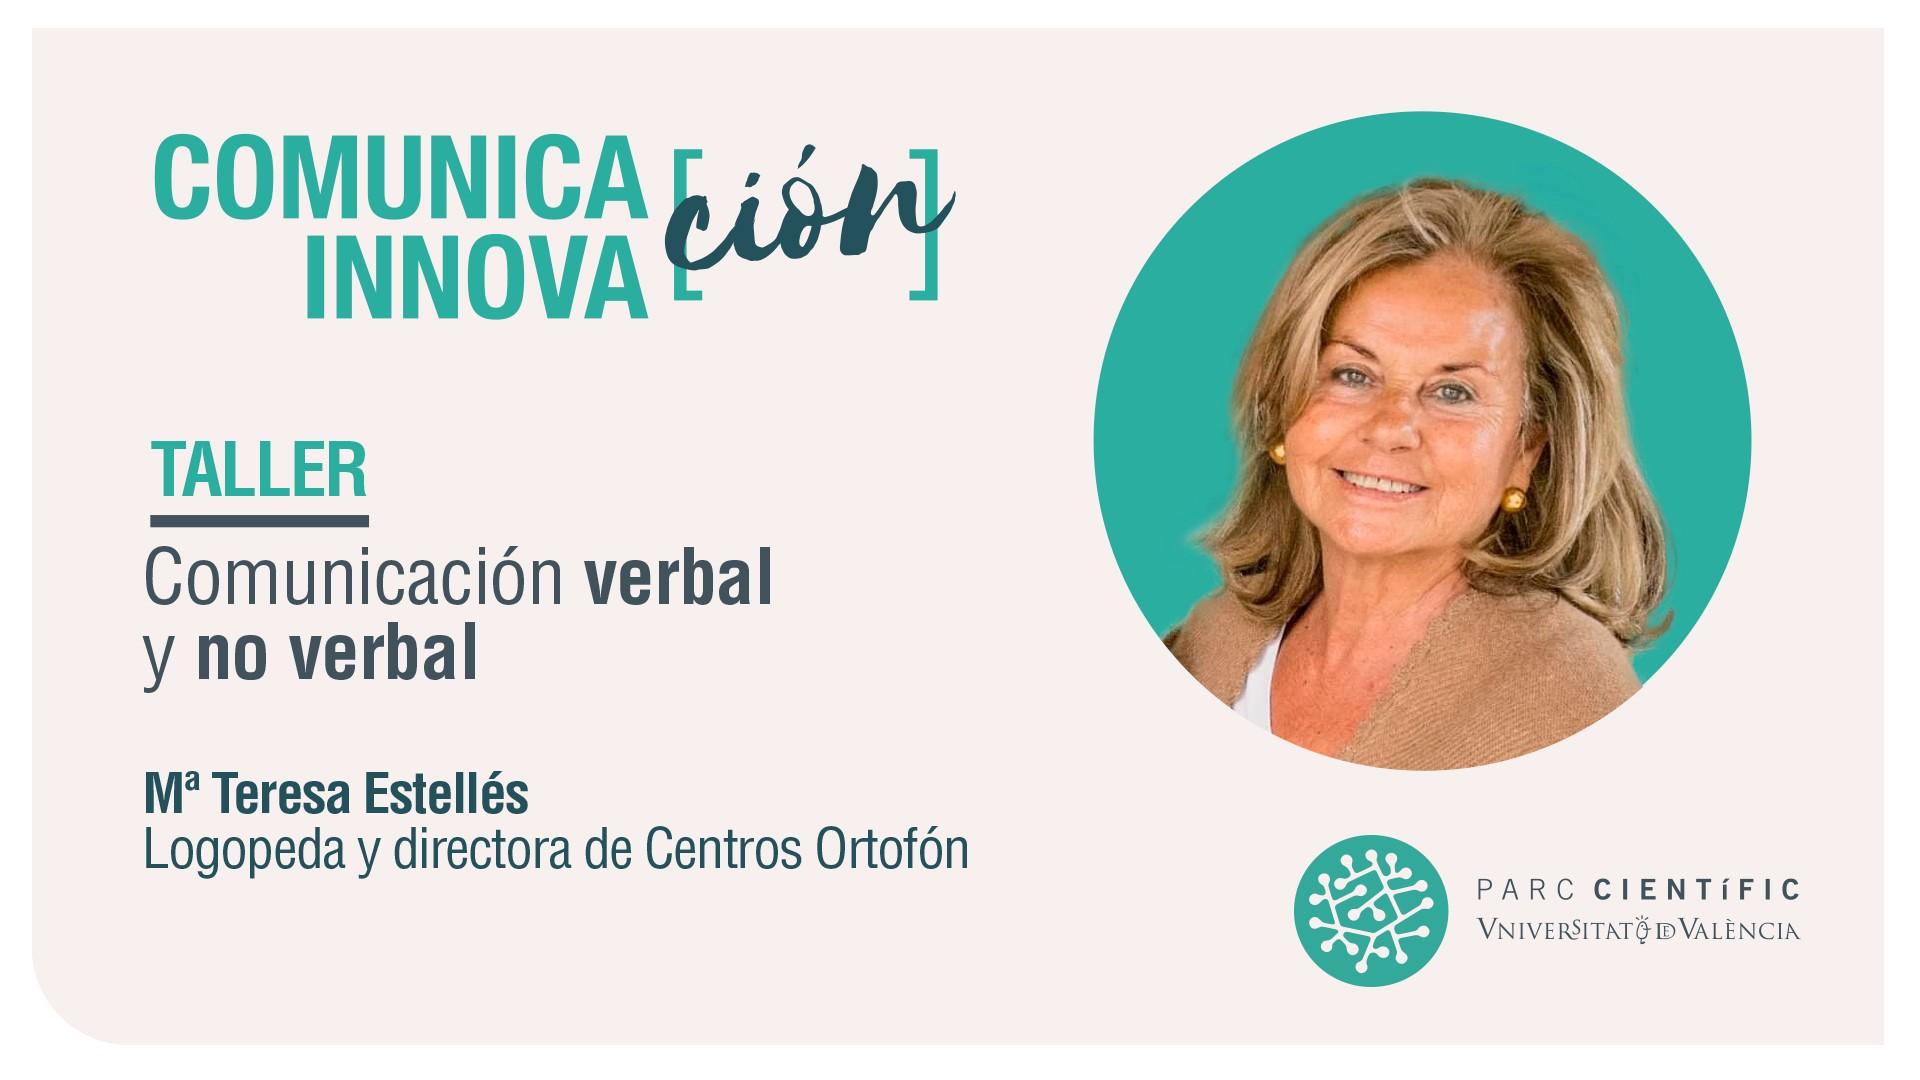 Communica-Innova[tion] Workshop: 'Verbal and Non-Verbal Communication'